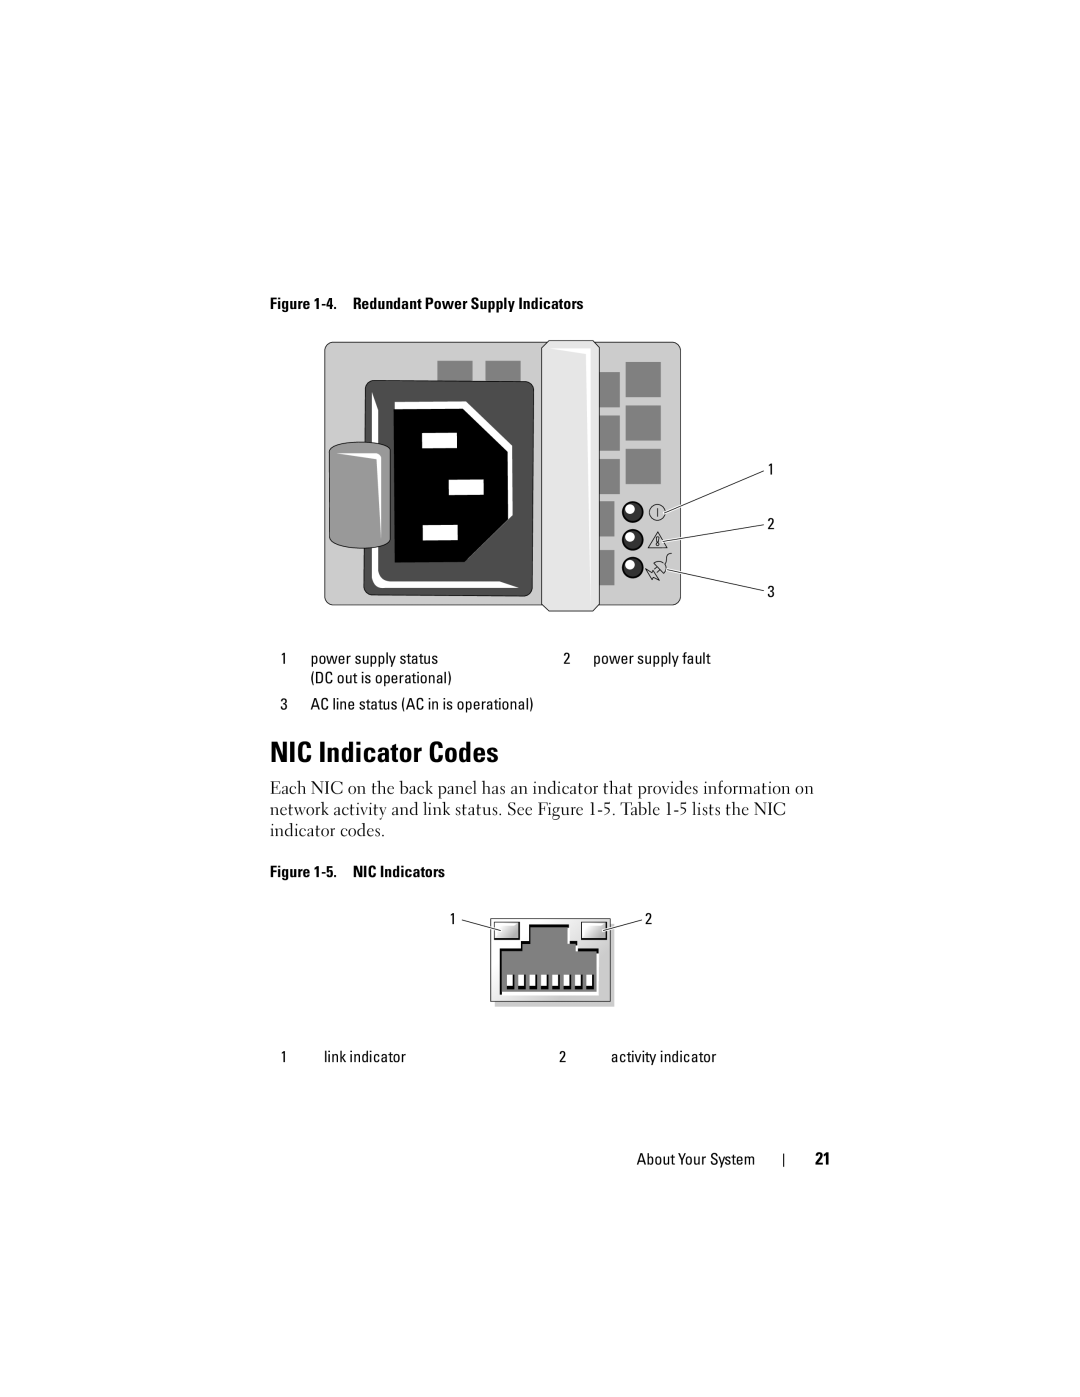 Dell R300 owner manual NIC Indicator Codes, activity indicator 